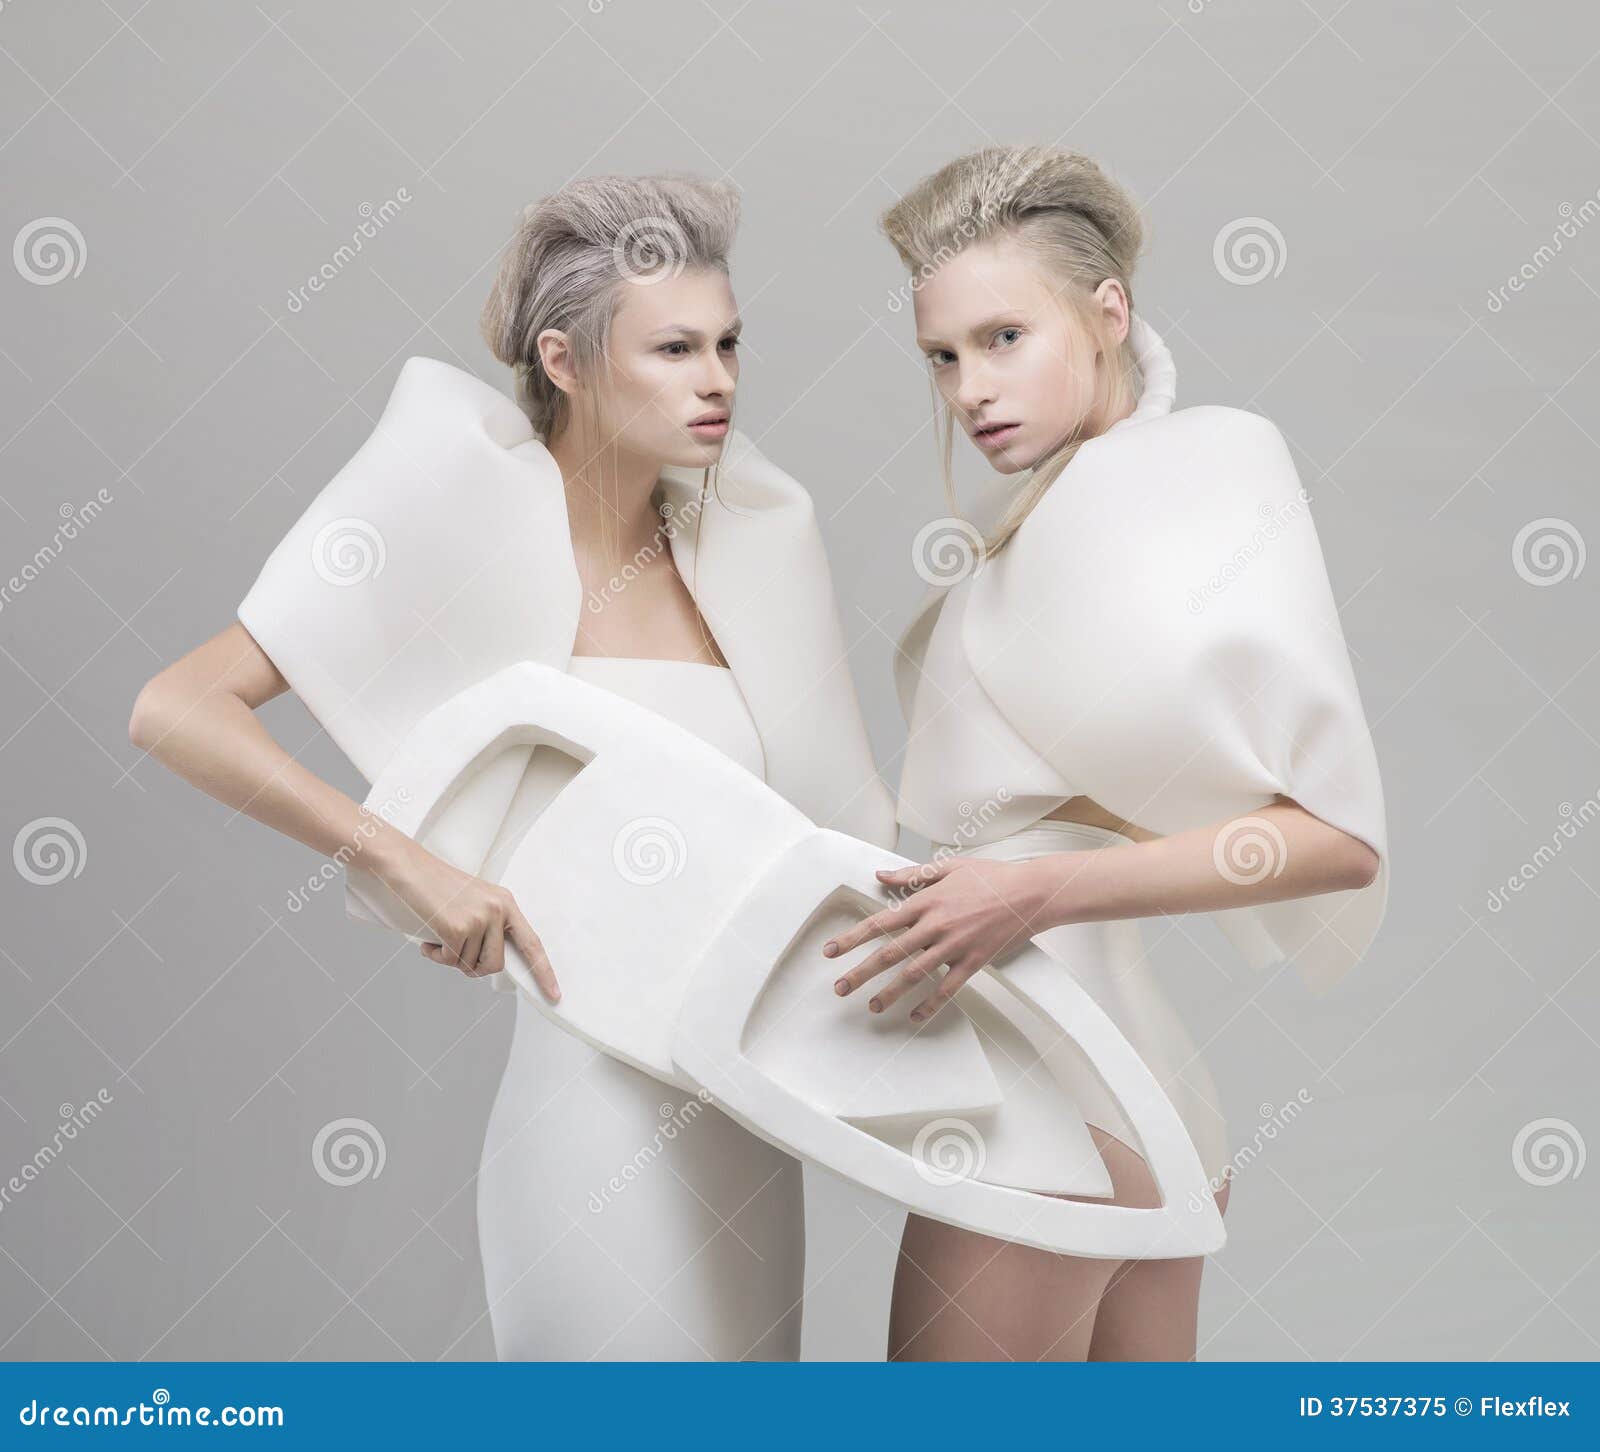 two futuristic blonde women in white outfit